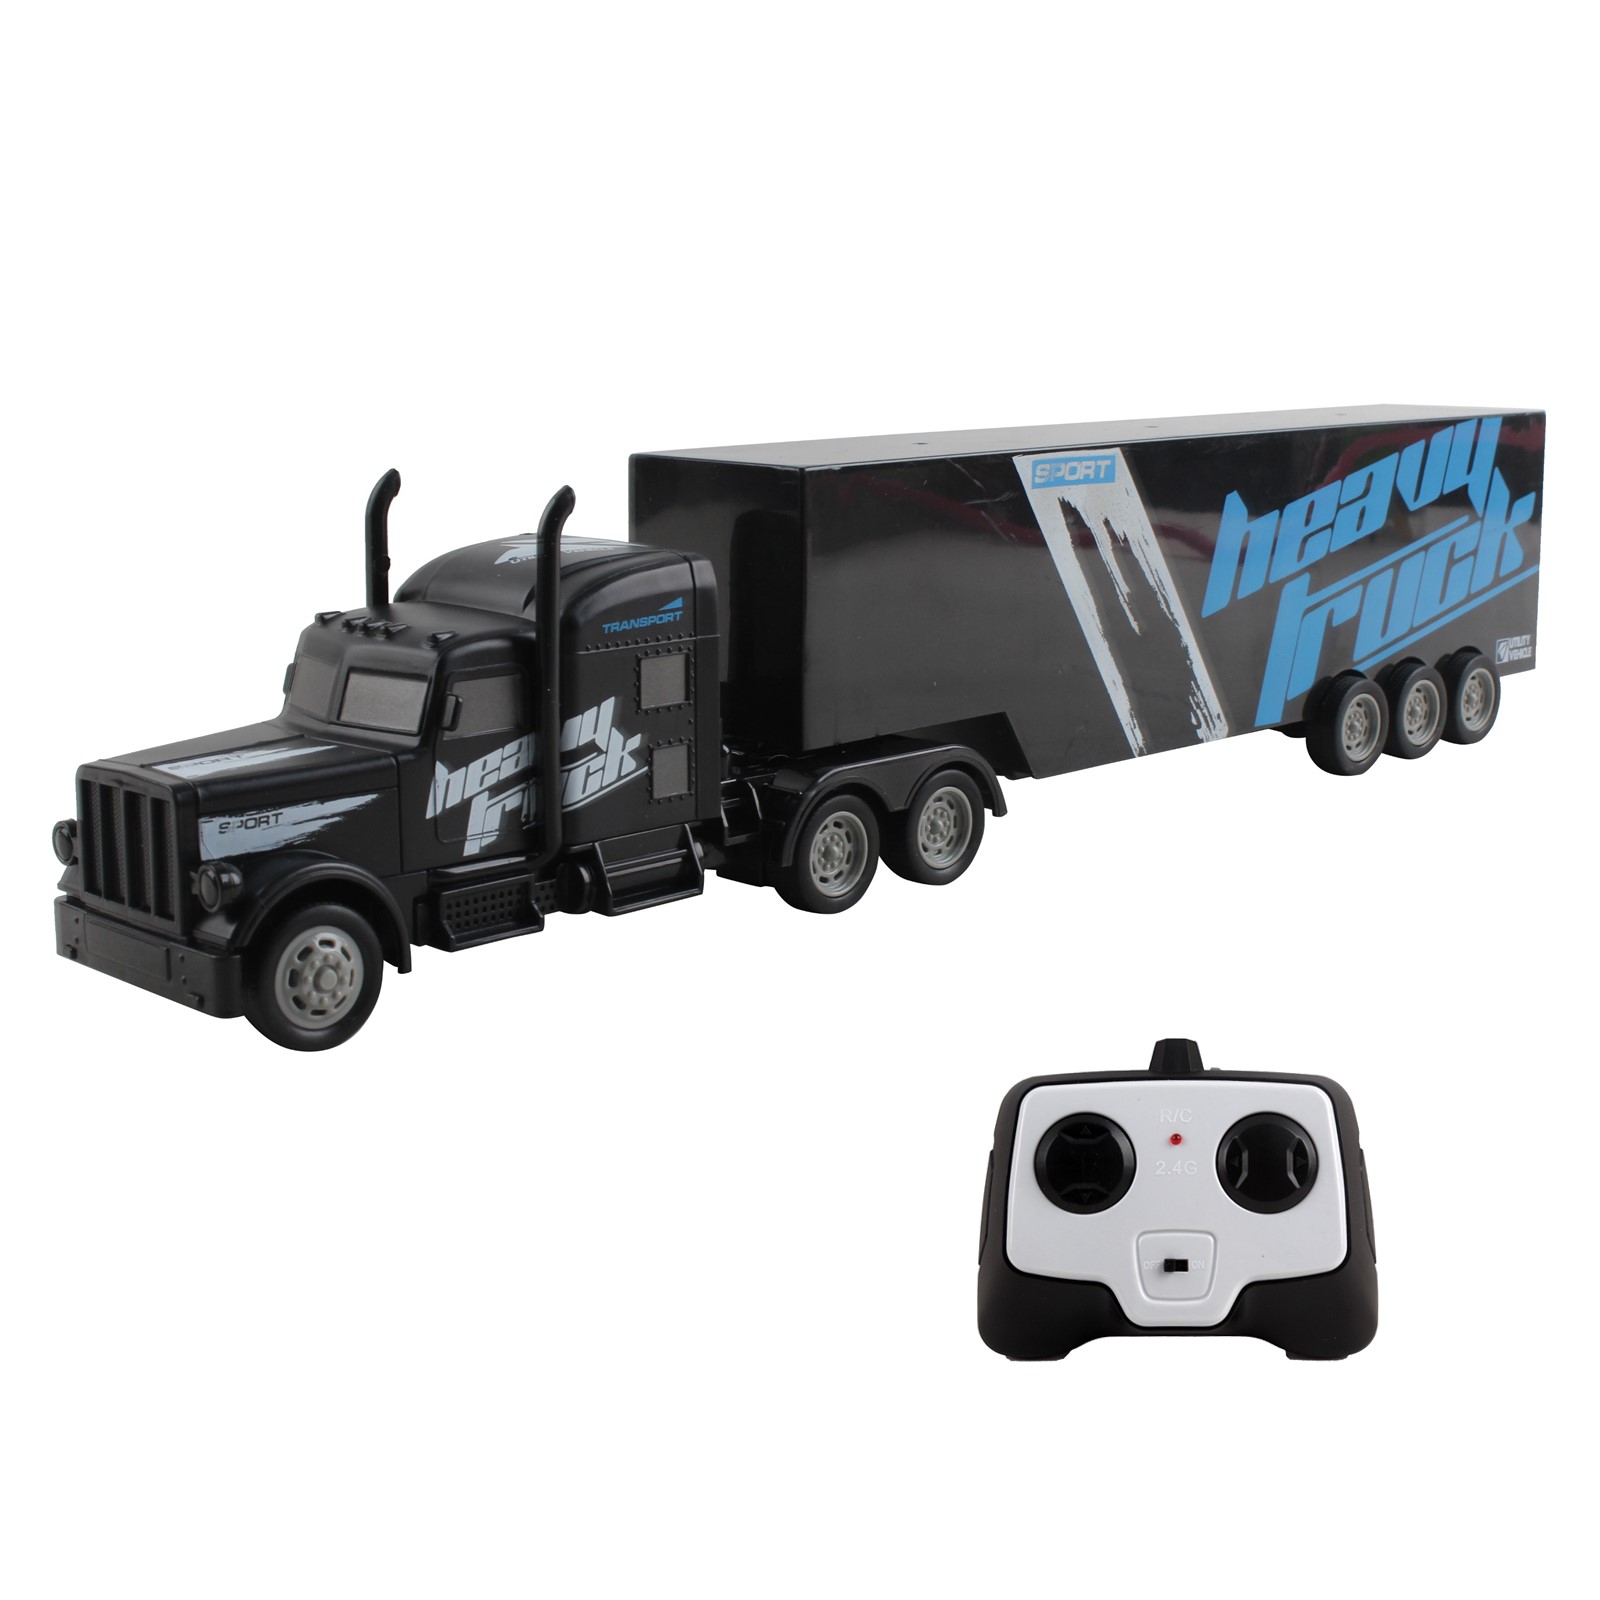 Vokodo RC Semi Truck And Trailer 18 Inch 2.4Ghz Fast Speed 1:16 Scale Electric Hauler Rechargeable Battery Included Remote Control Car Kids Big Rig Toy Vehicle Great Gift For Children Boy Girl (Black)